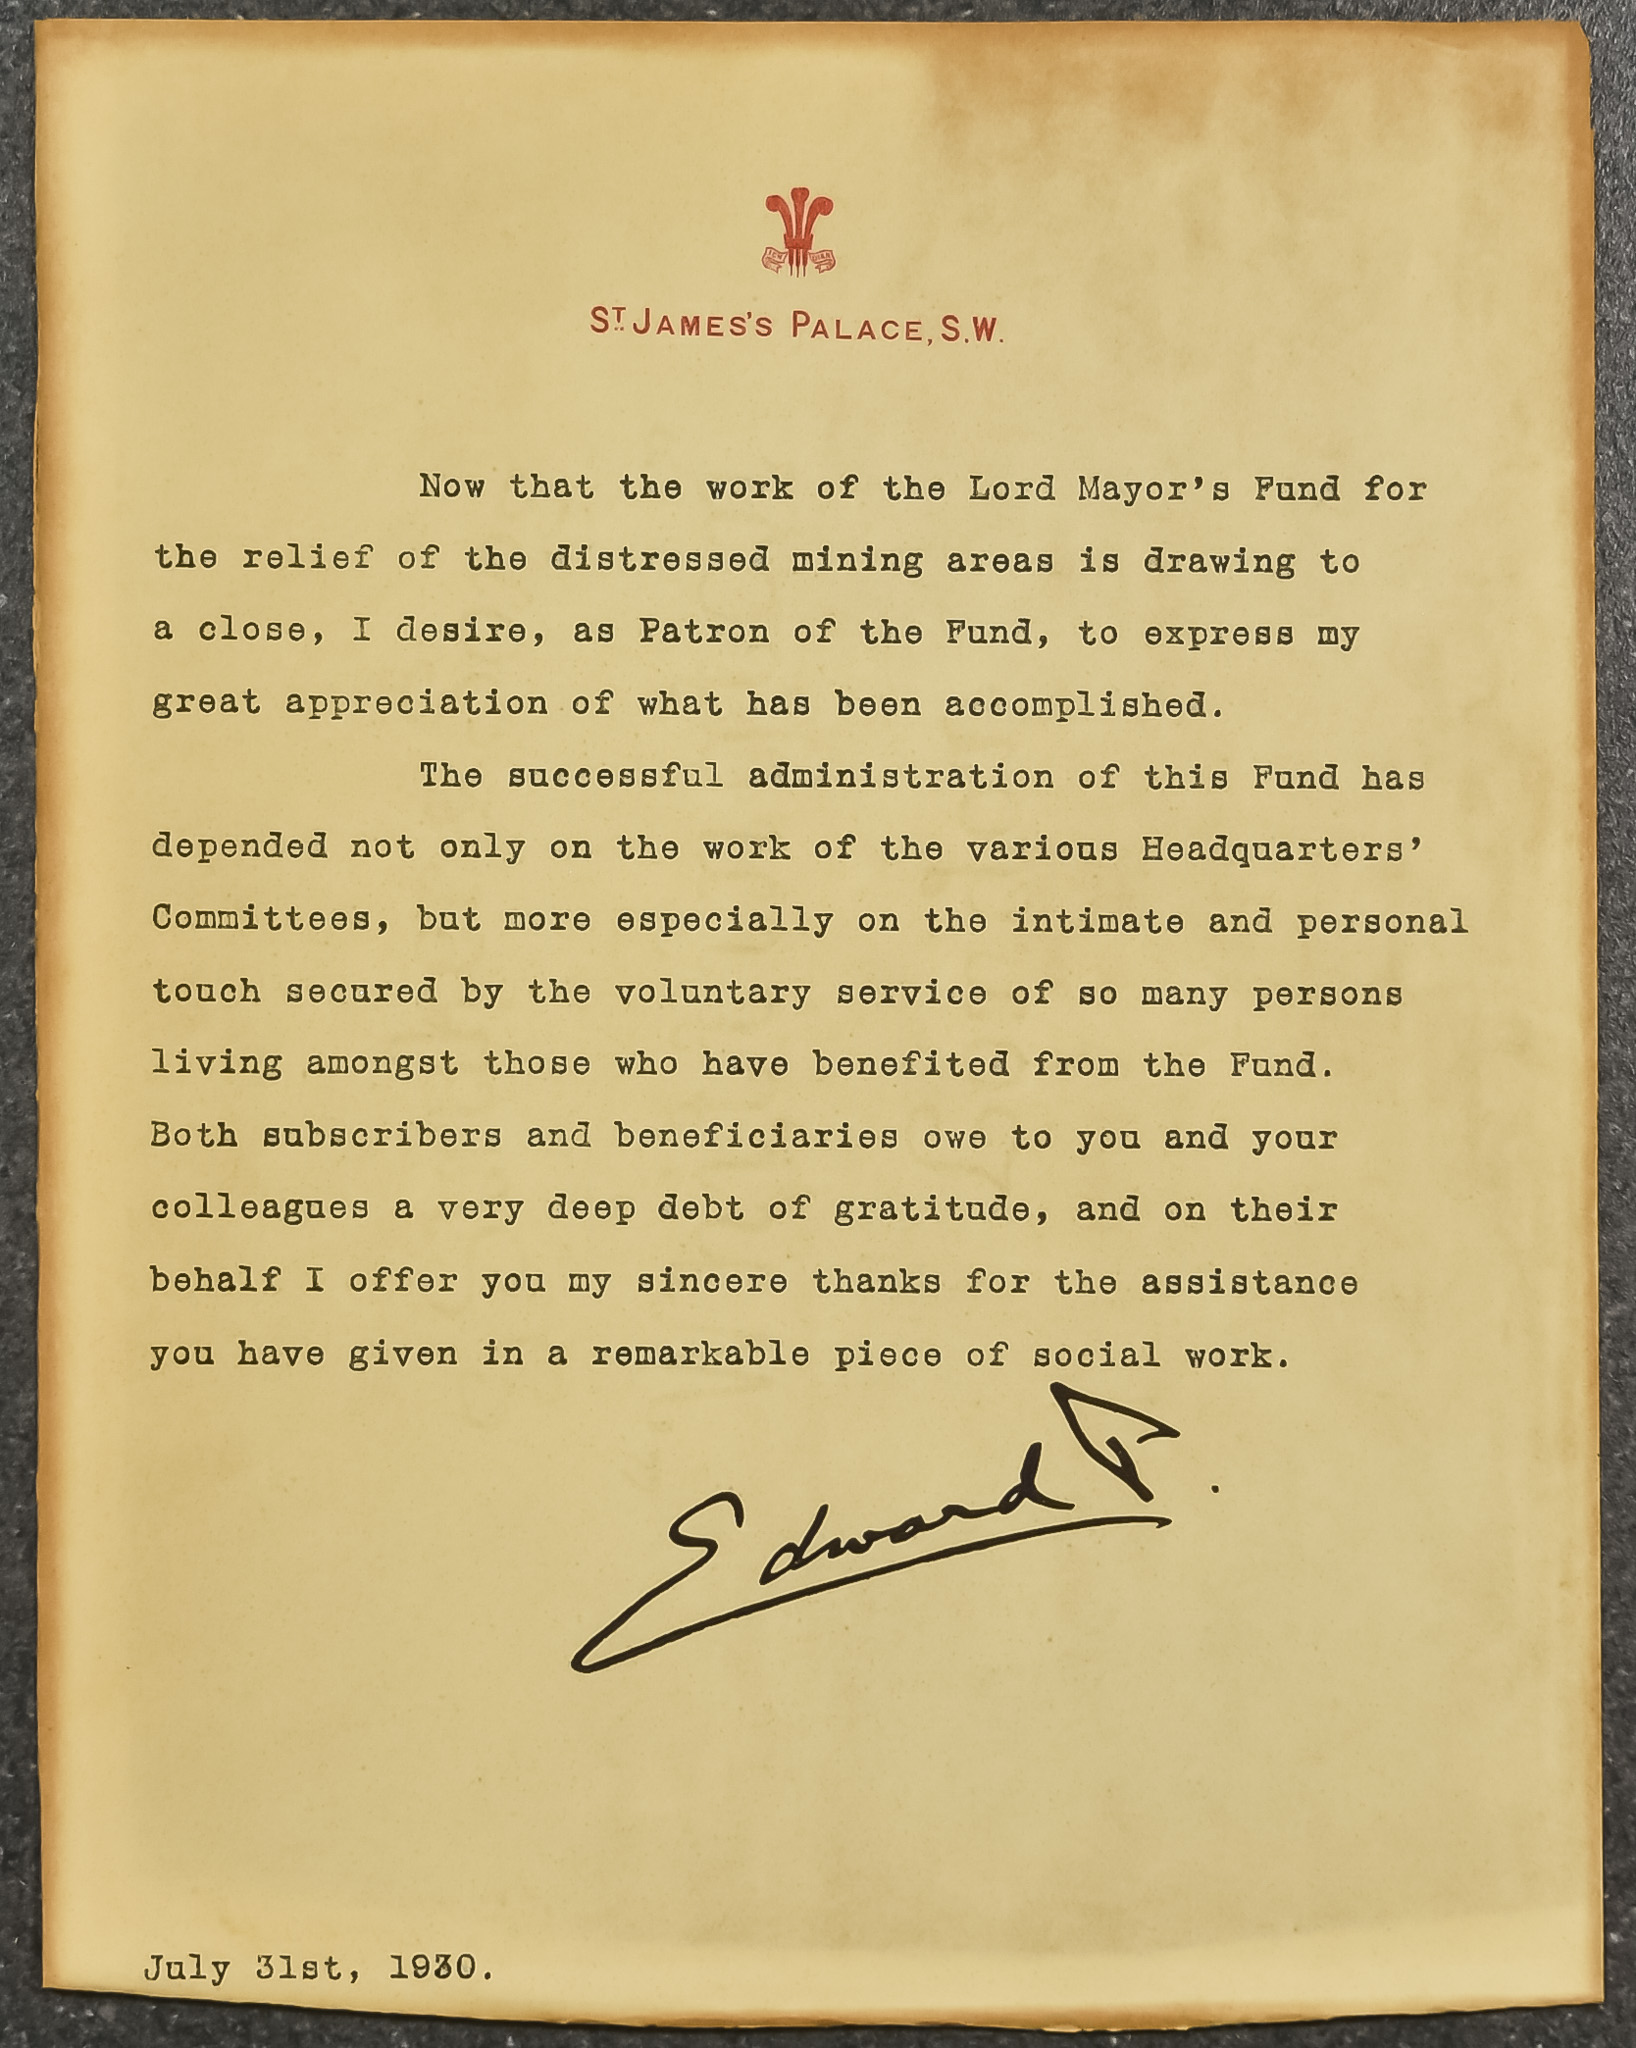 H. R. H. King Edward VIII (1894-1972) - Typewritten, signed letter, on 'St James's Palace. S.W'